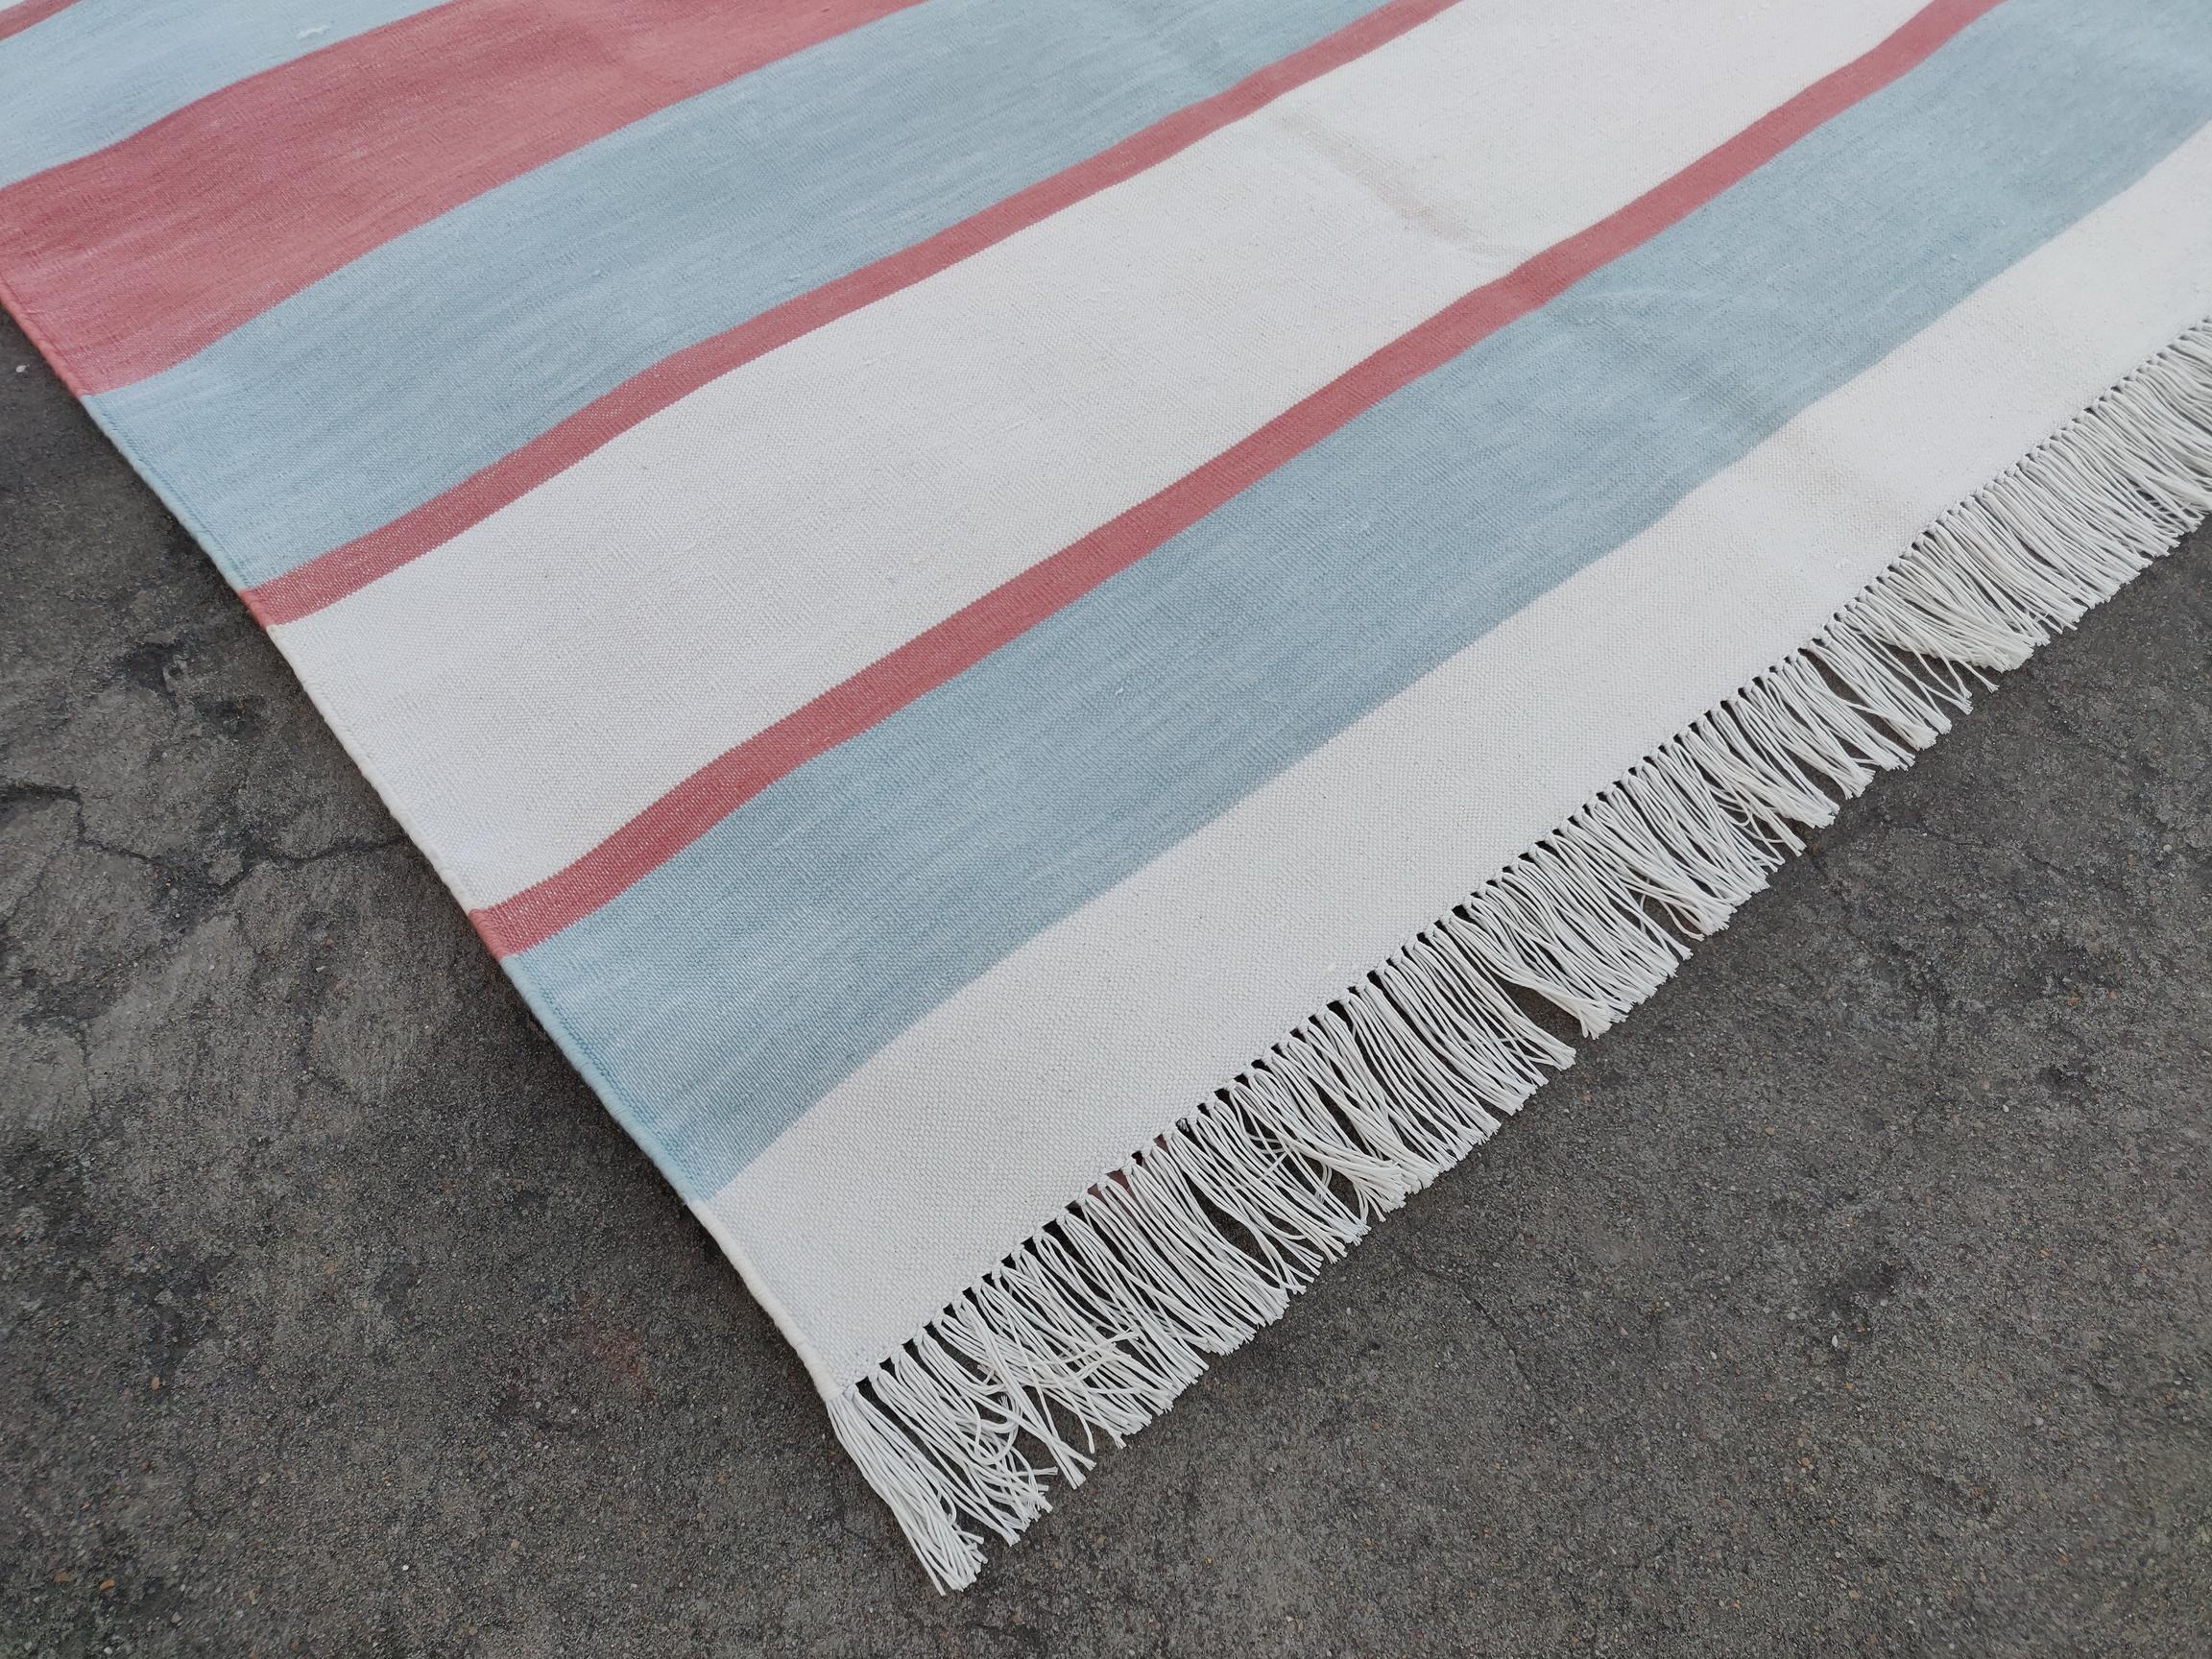 Cotton Vegetable Dyed Pale Aqua and Red Striped Indian Dhurrie Rug-8'x10' 

These special flat-weave dhurries are hand-woven with 15 ply 100% cotton yarn. Due to the special manufacturing techniques used to create our rugs, the size and color of